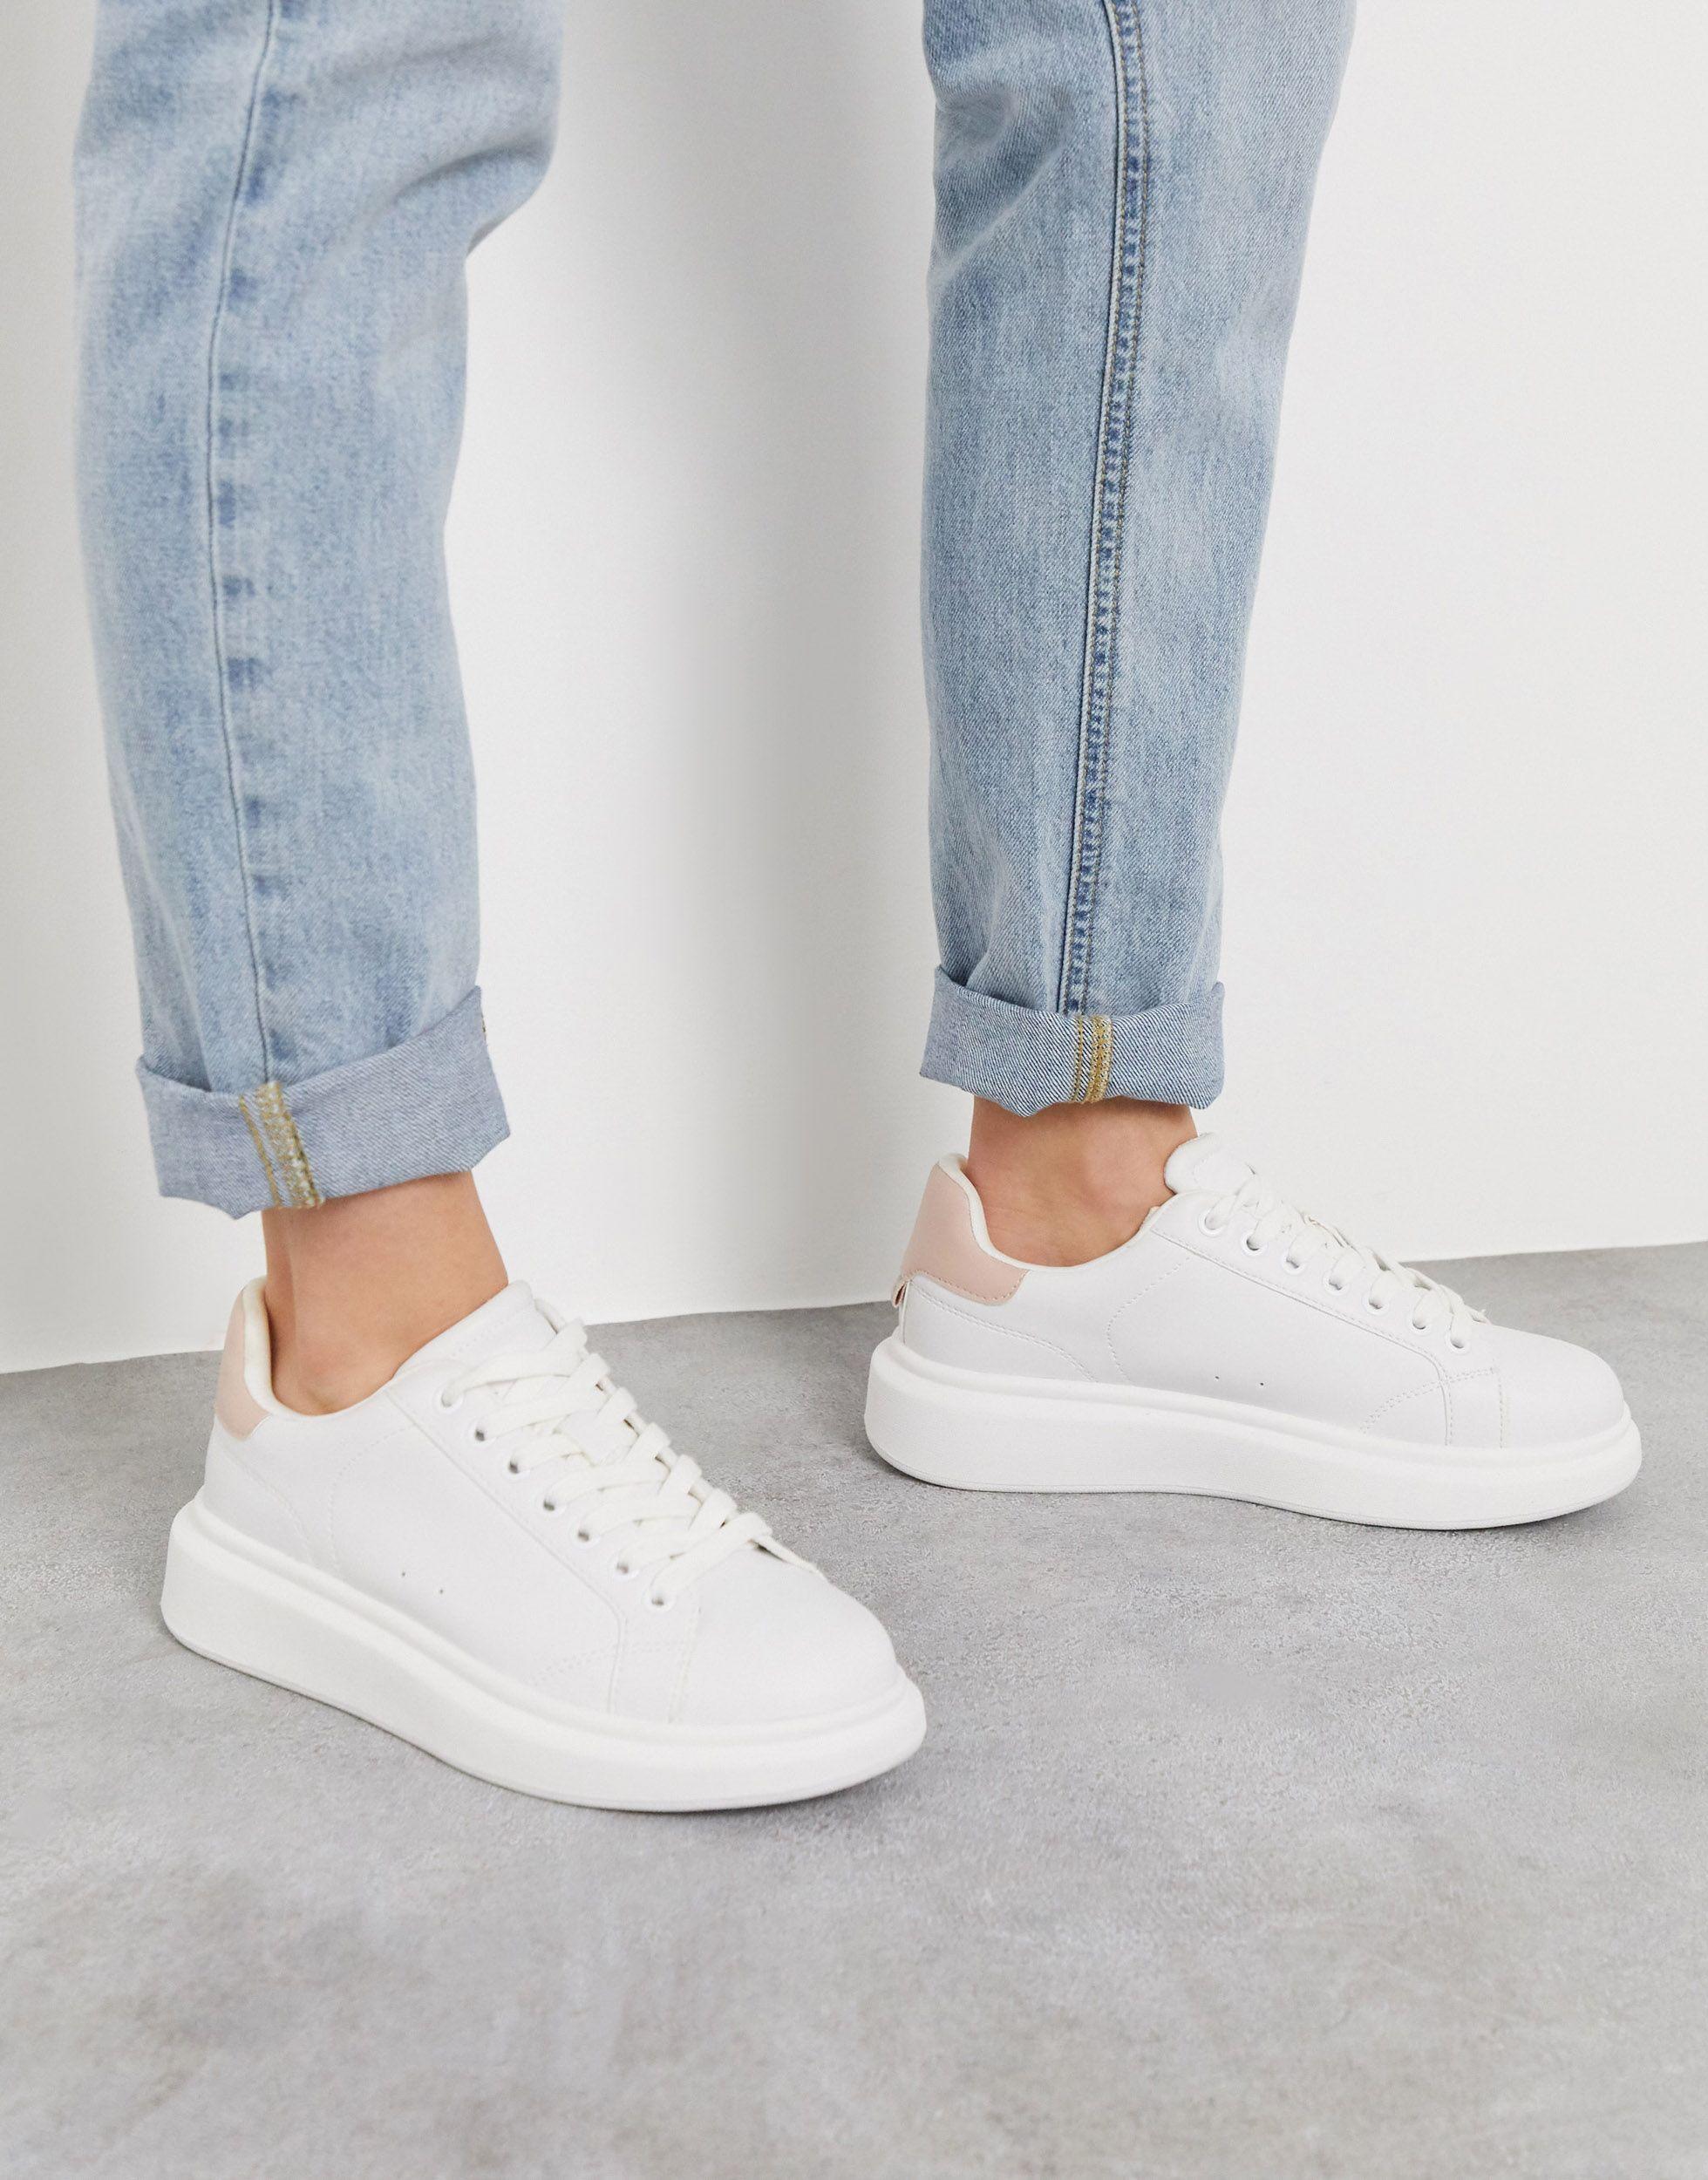 Pull&Bear Flatform Sneakers With Nude Back Tab in White - Lyst